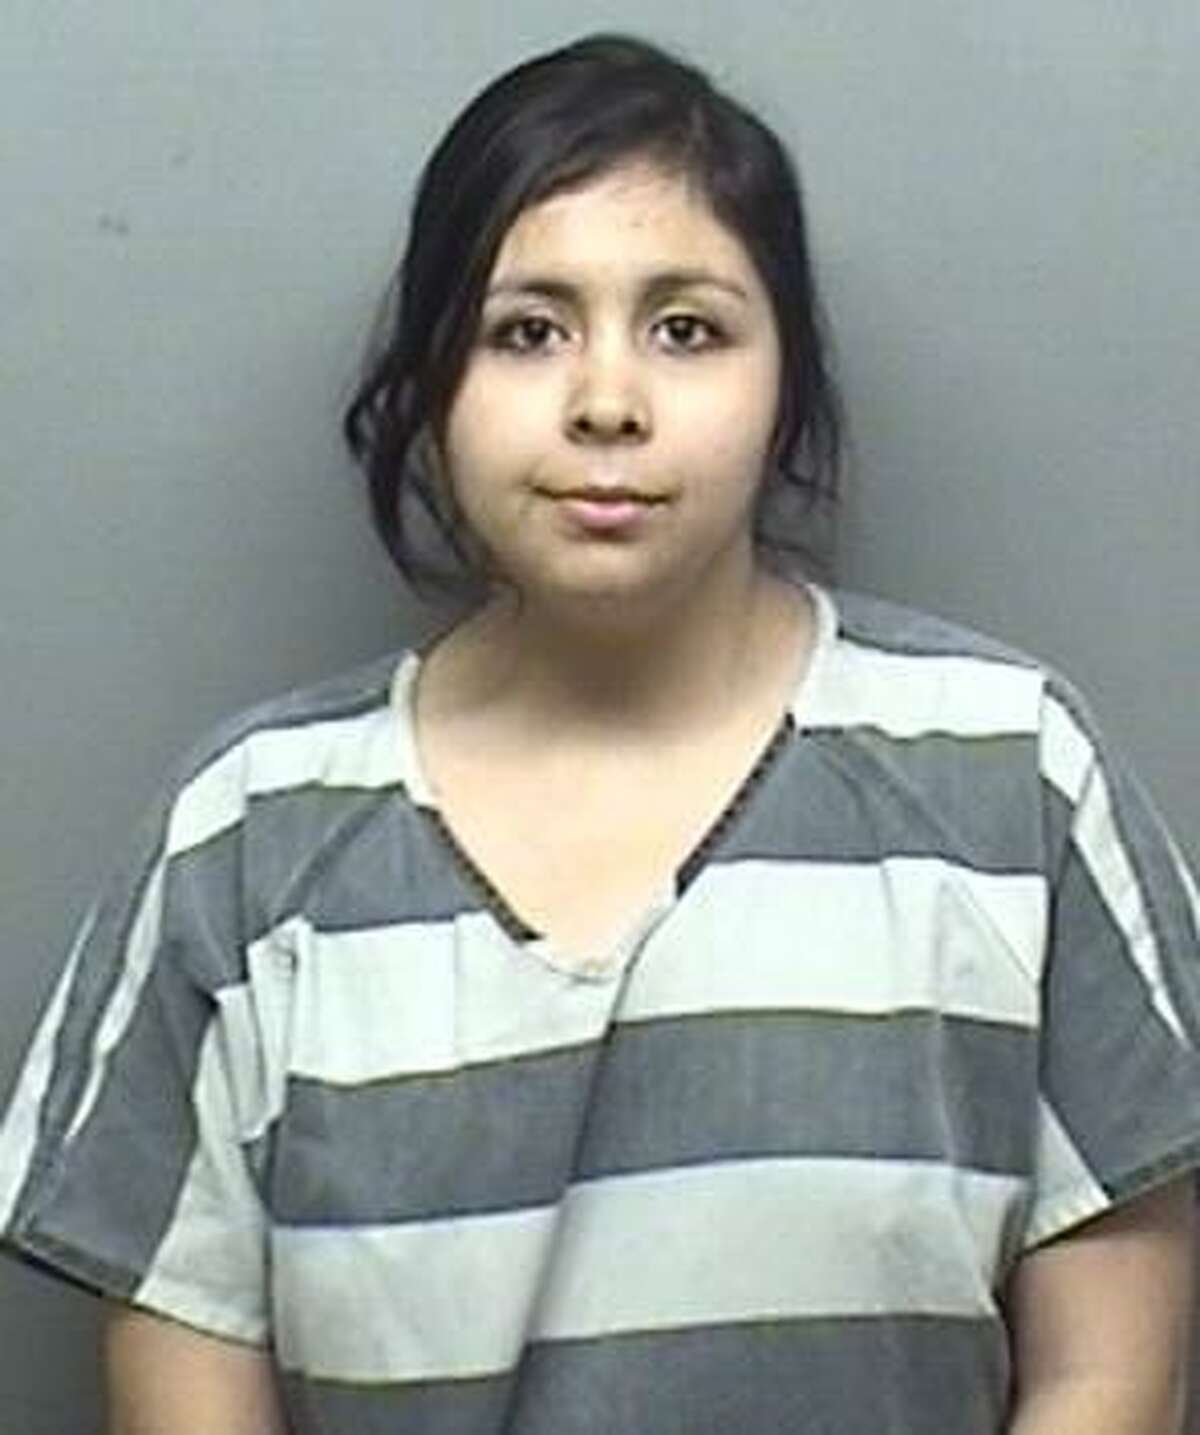 Karla Patricia Ramos received a probated sentence of 10 years.